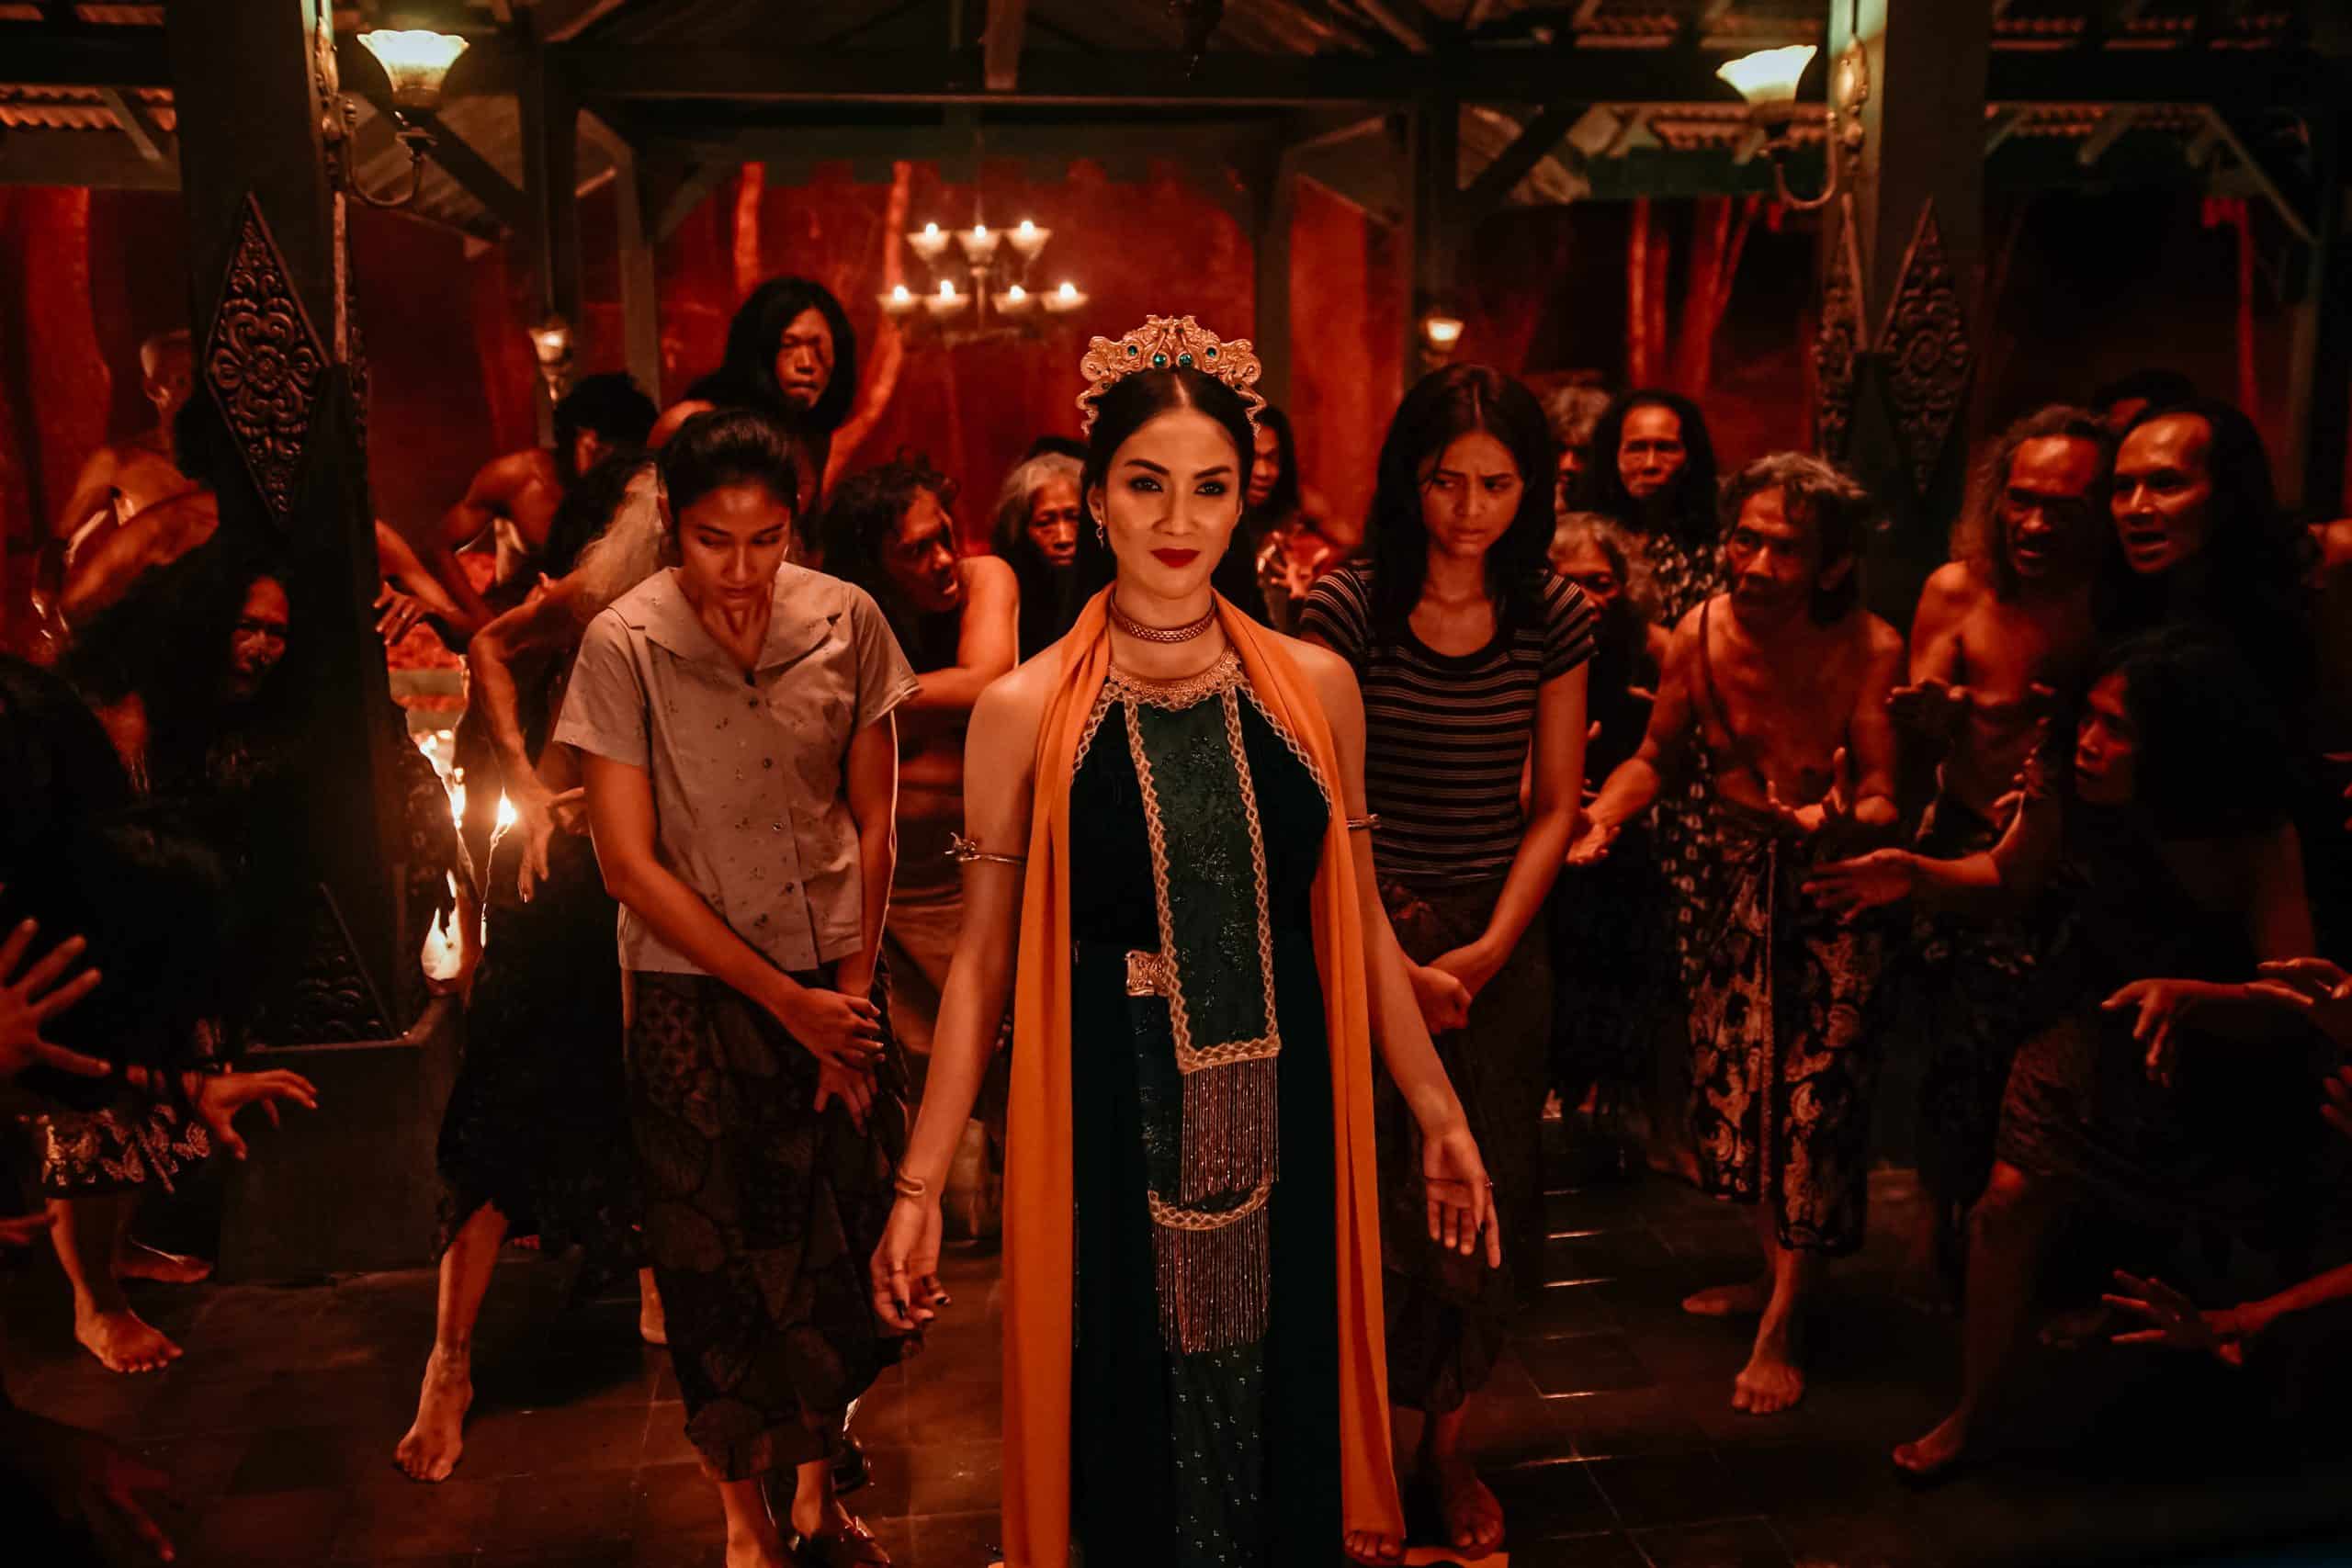 A woman in traditional attire walks confidently at the forefront of a candle-lit ceremony, surrounded by a group of attentive participants in a dimly-lit, ornate village setting.